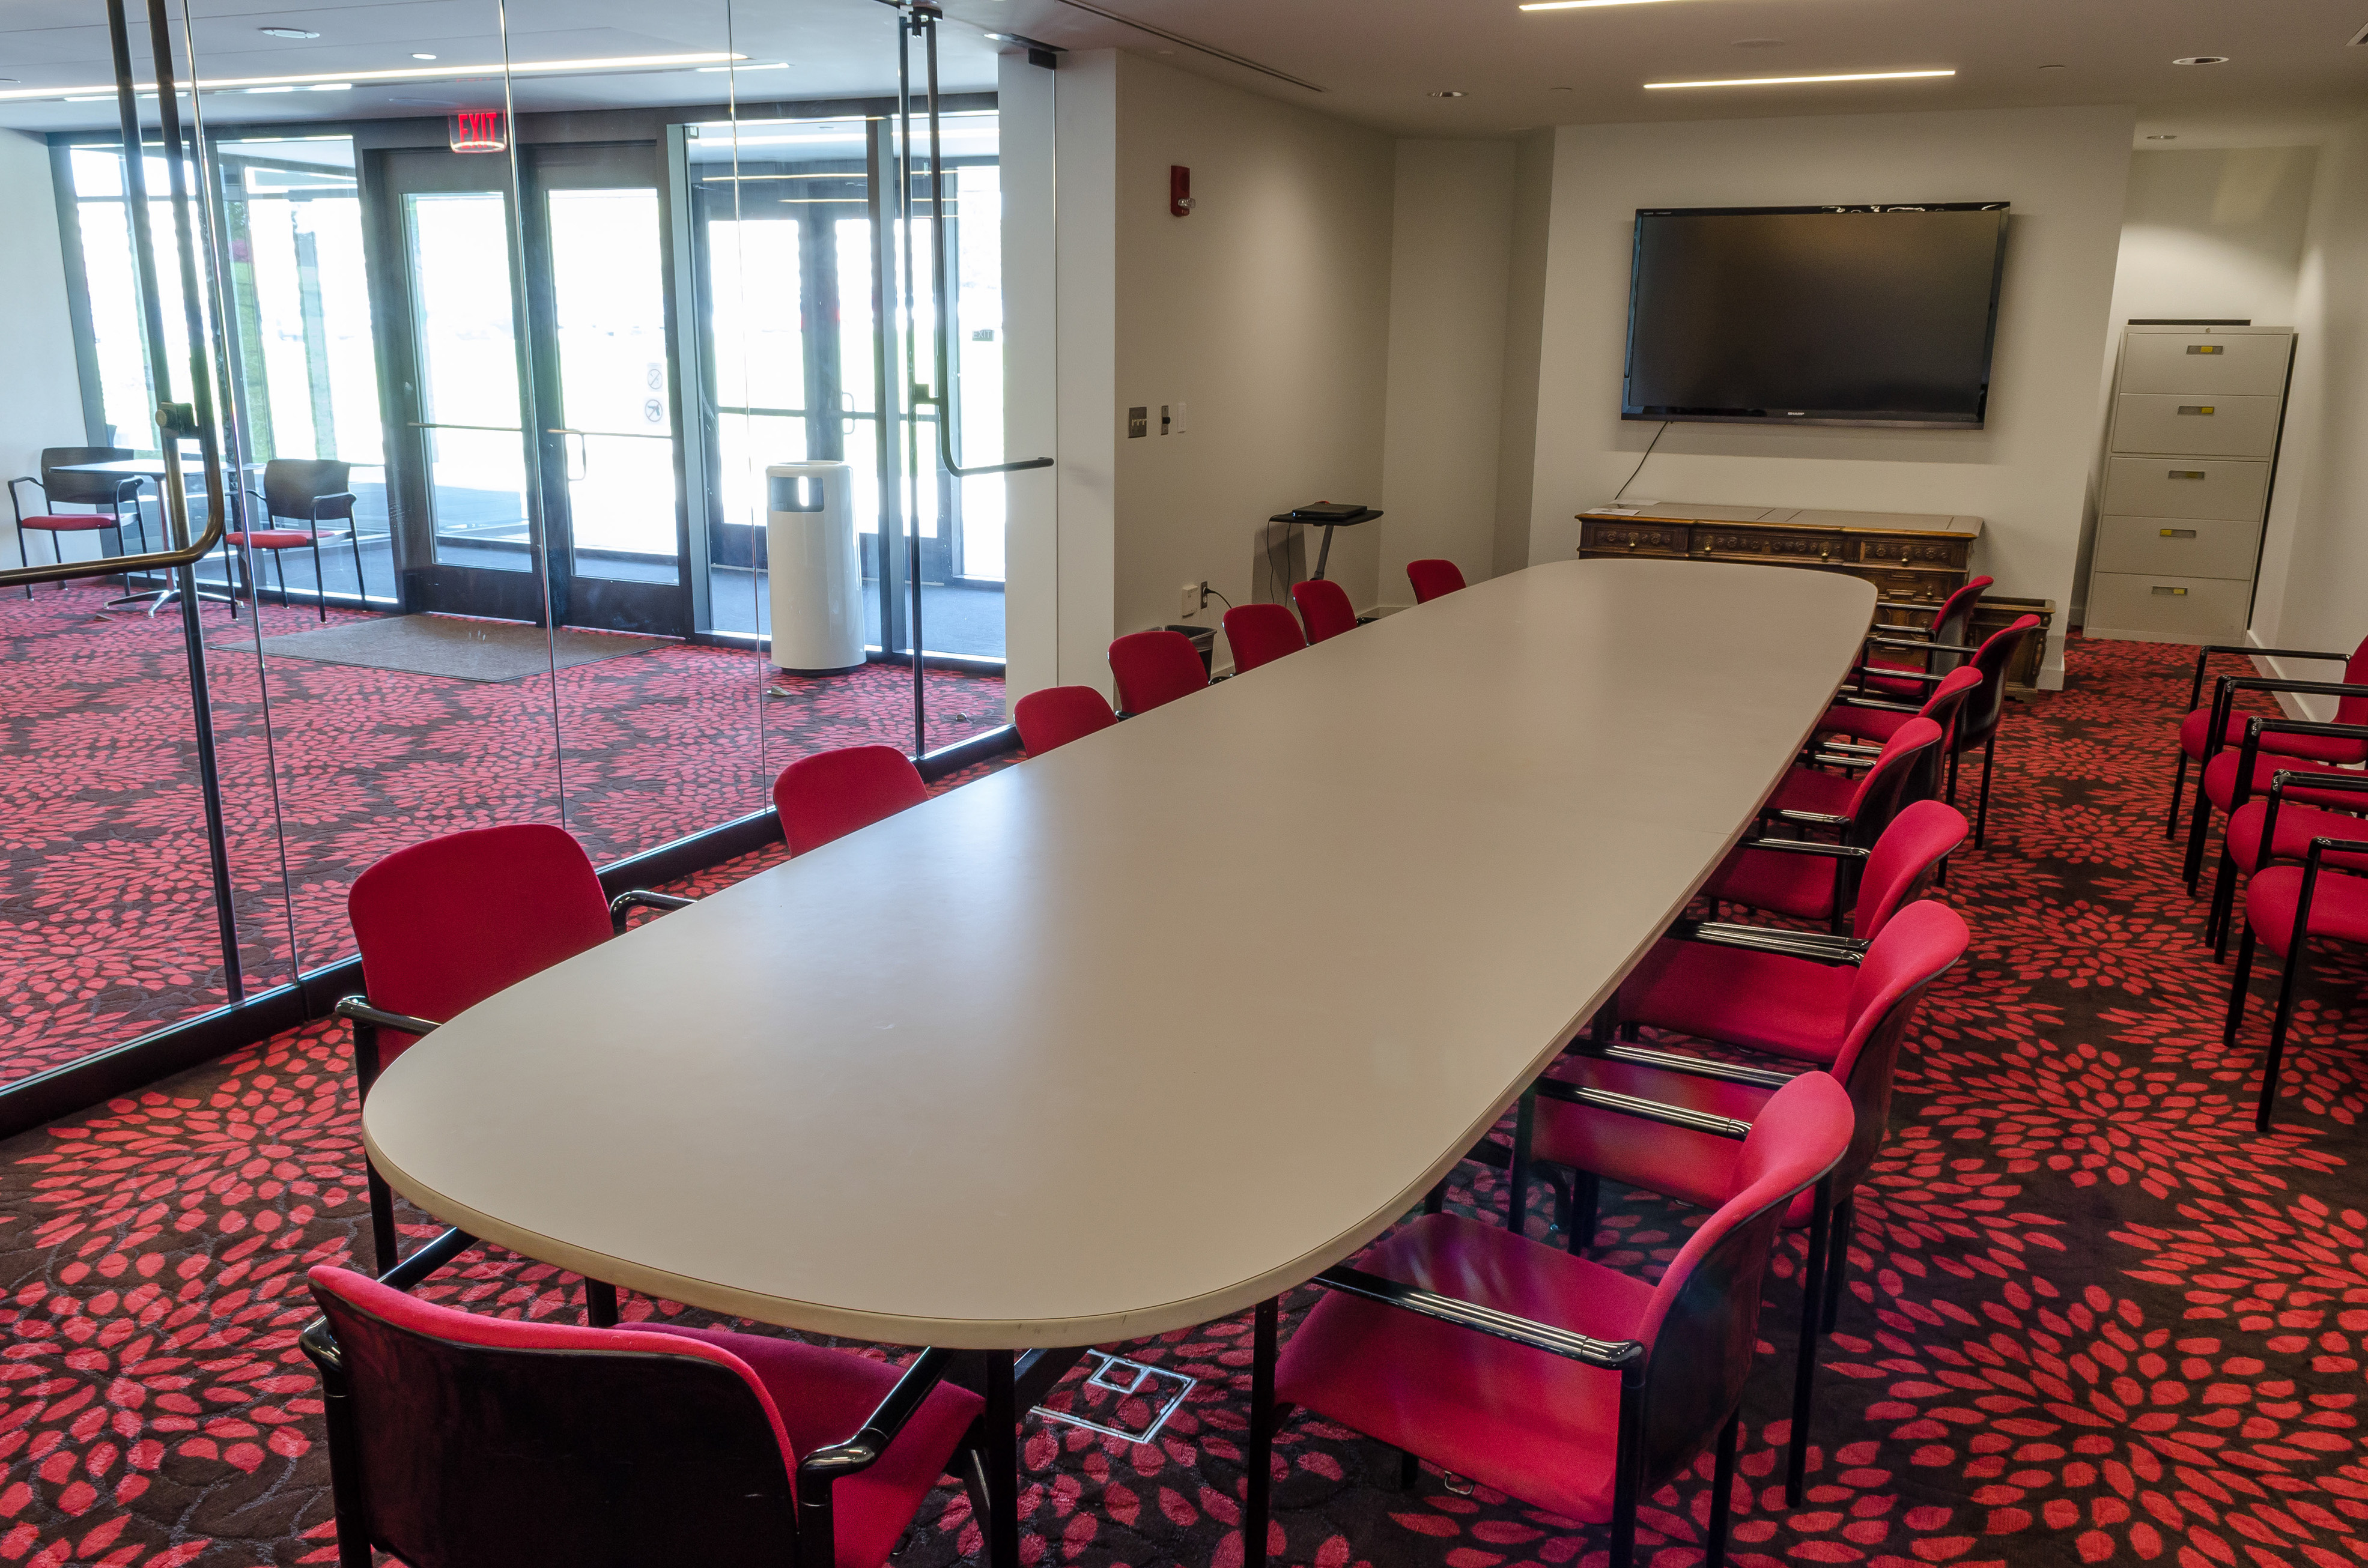 A conference room with a large table, chairs, and a screen.